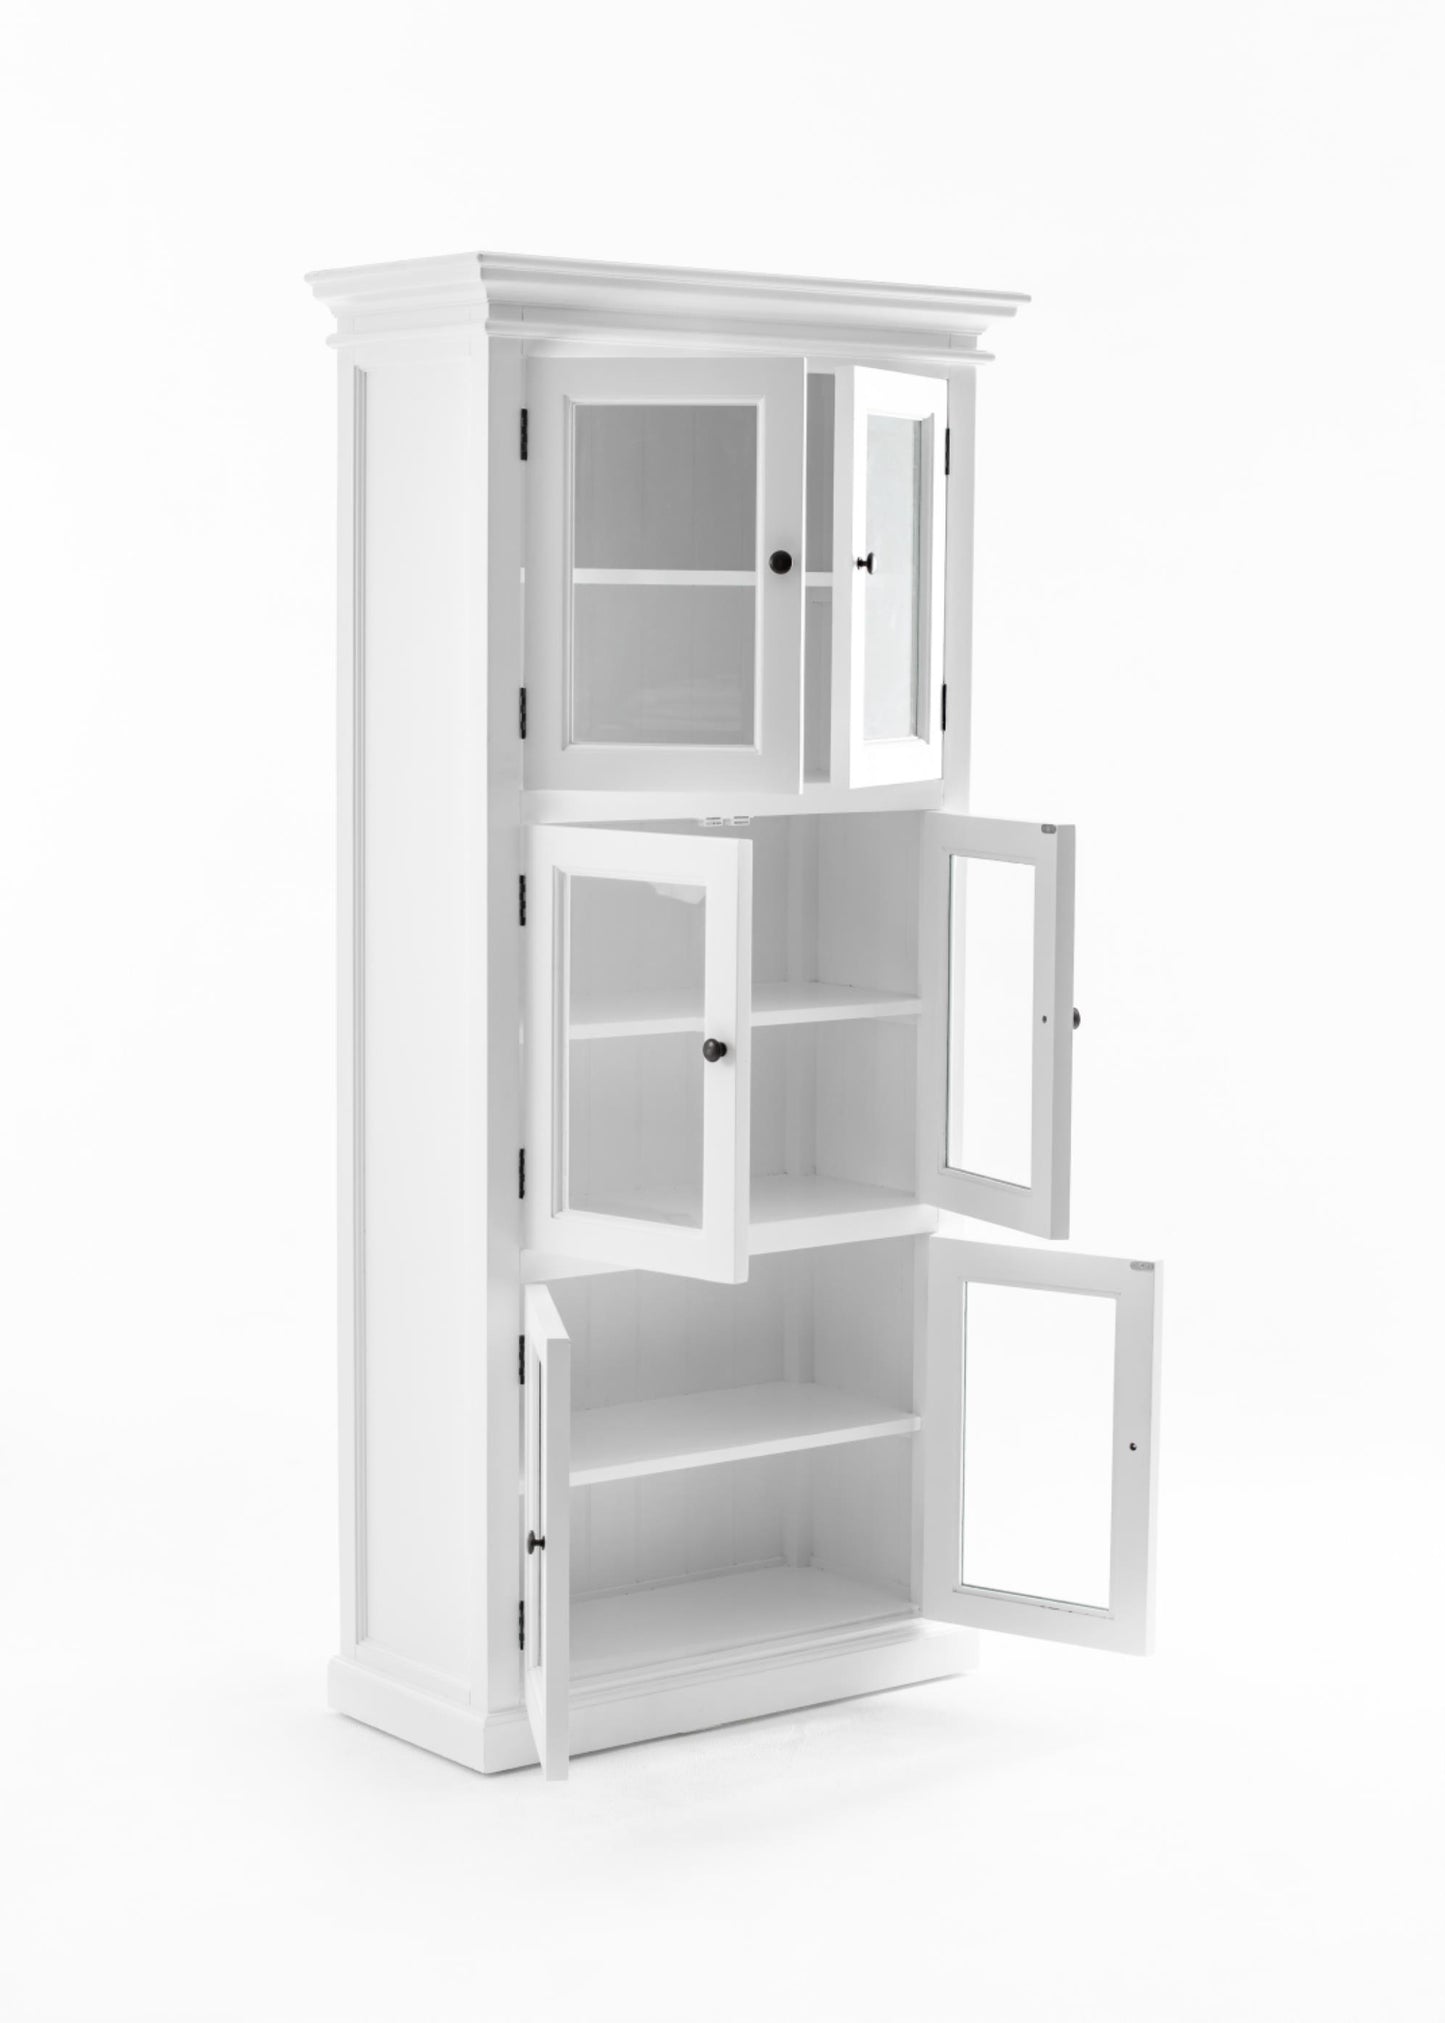 Halifax collection by Nova Solo.  3 Level Pantry CasaFenix